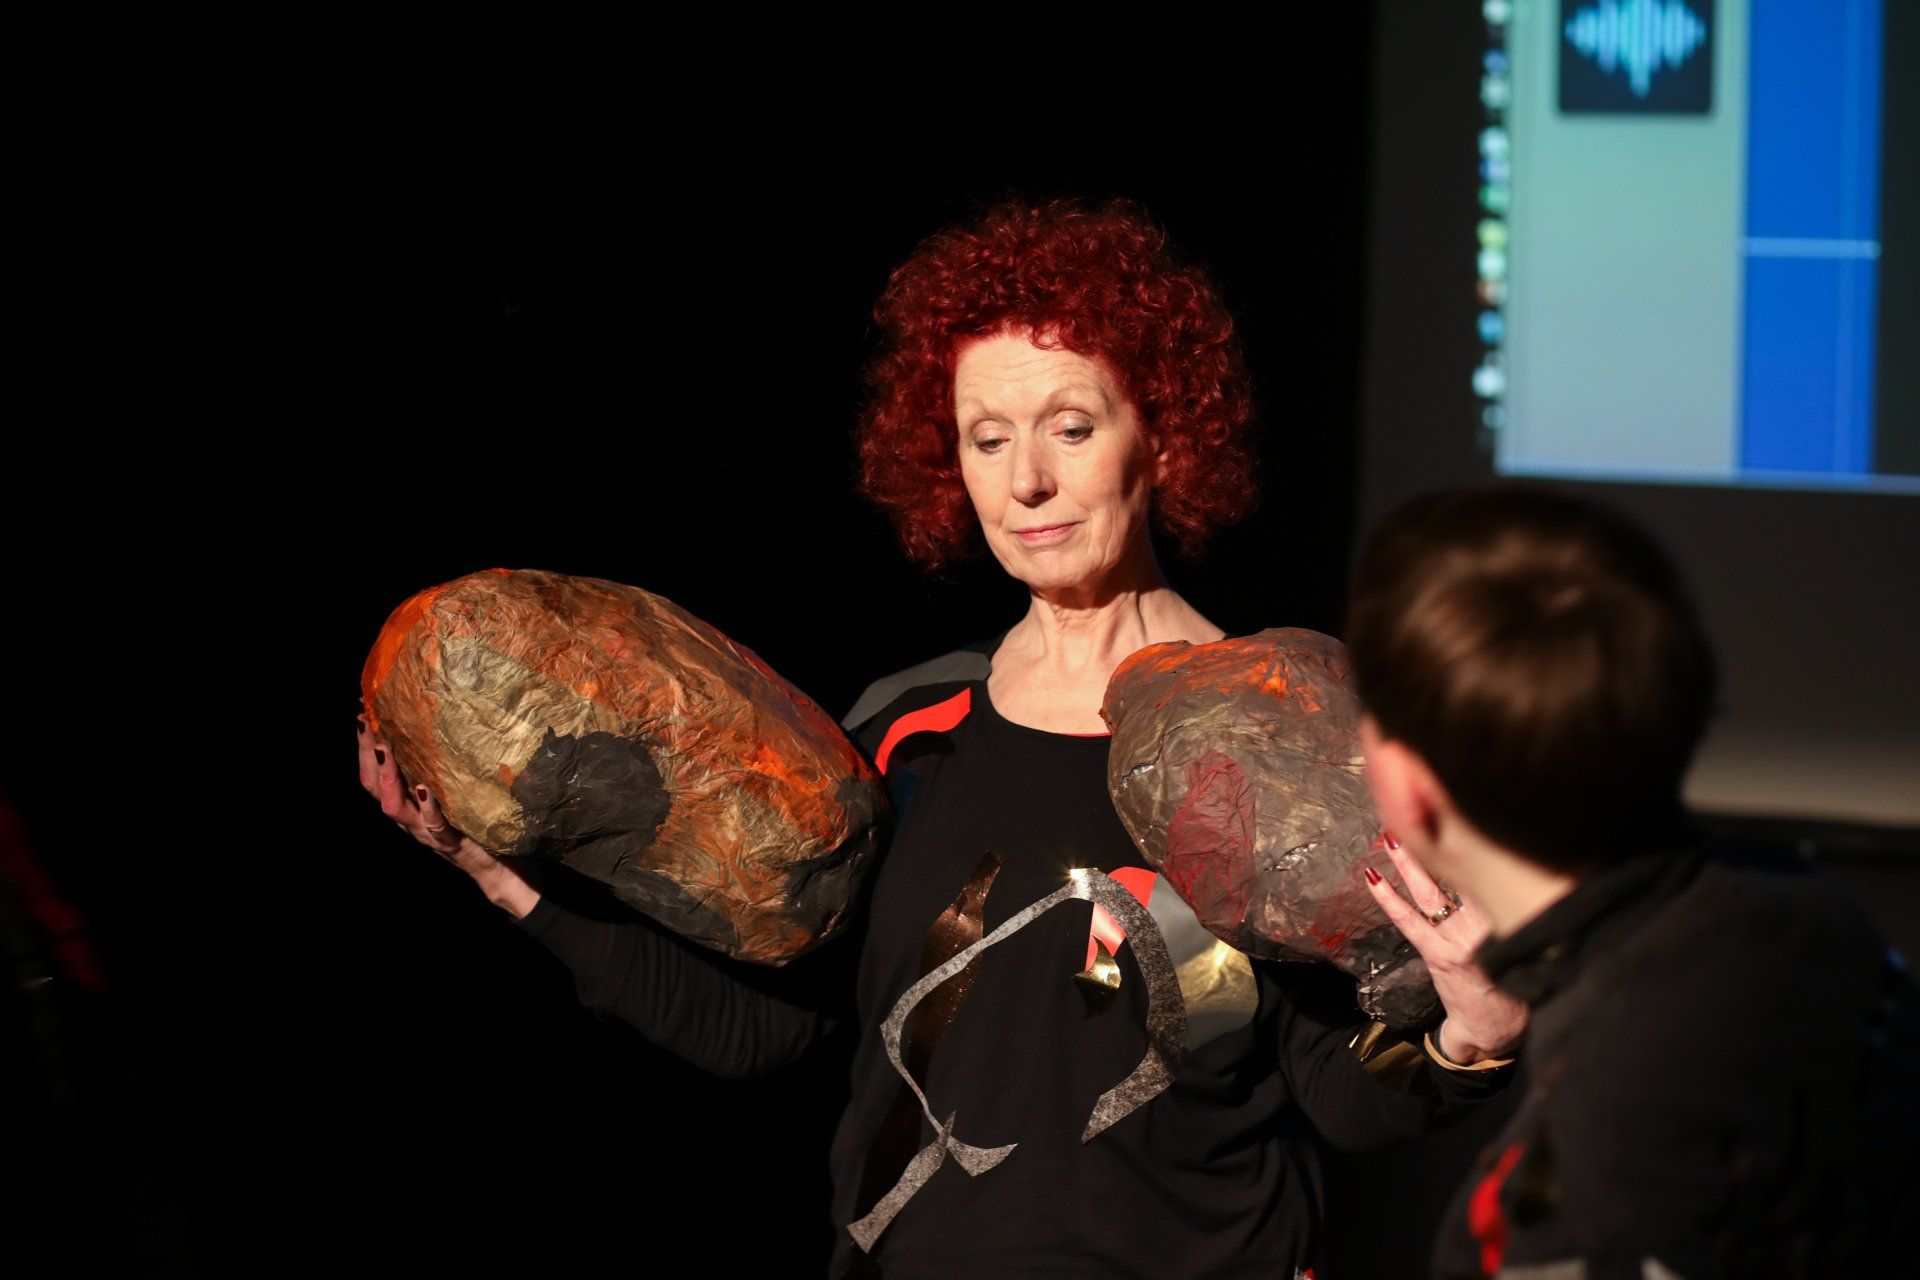 a woman with red hair is holding two large rocks in her hands .